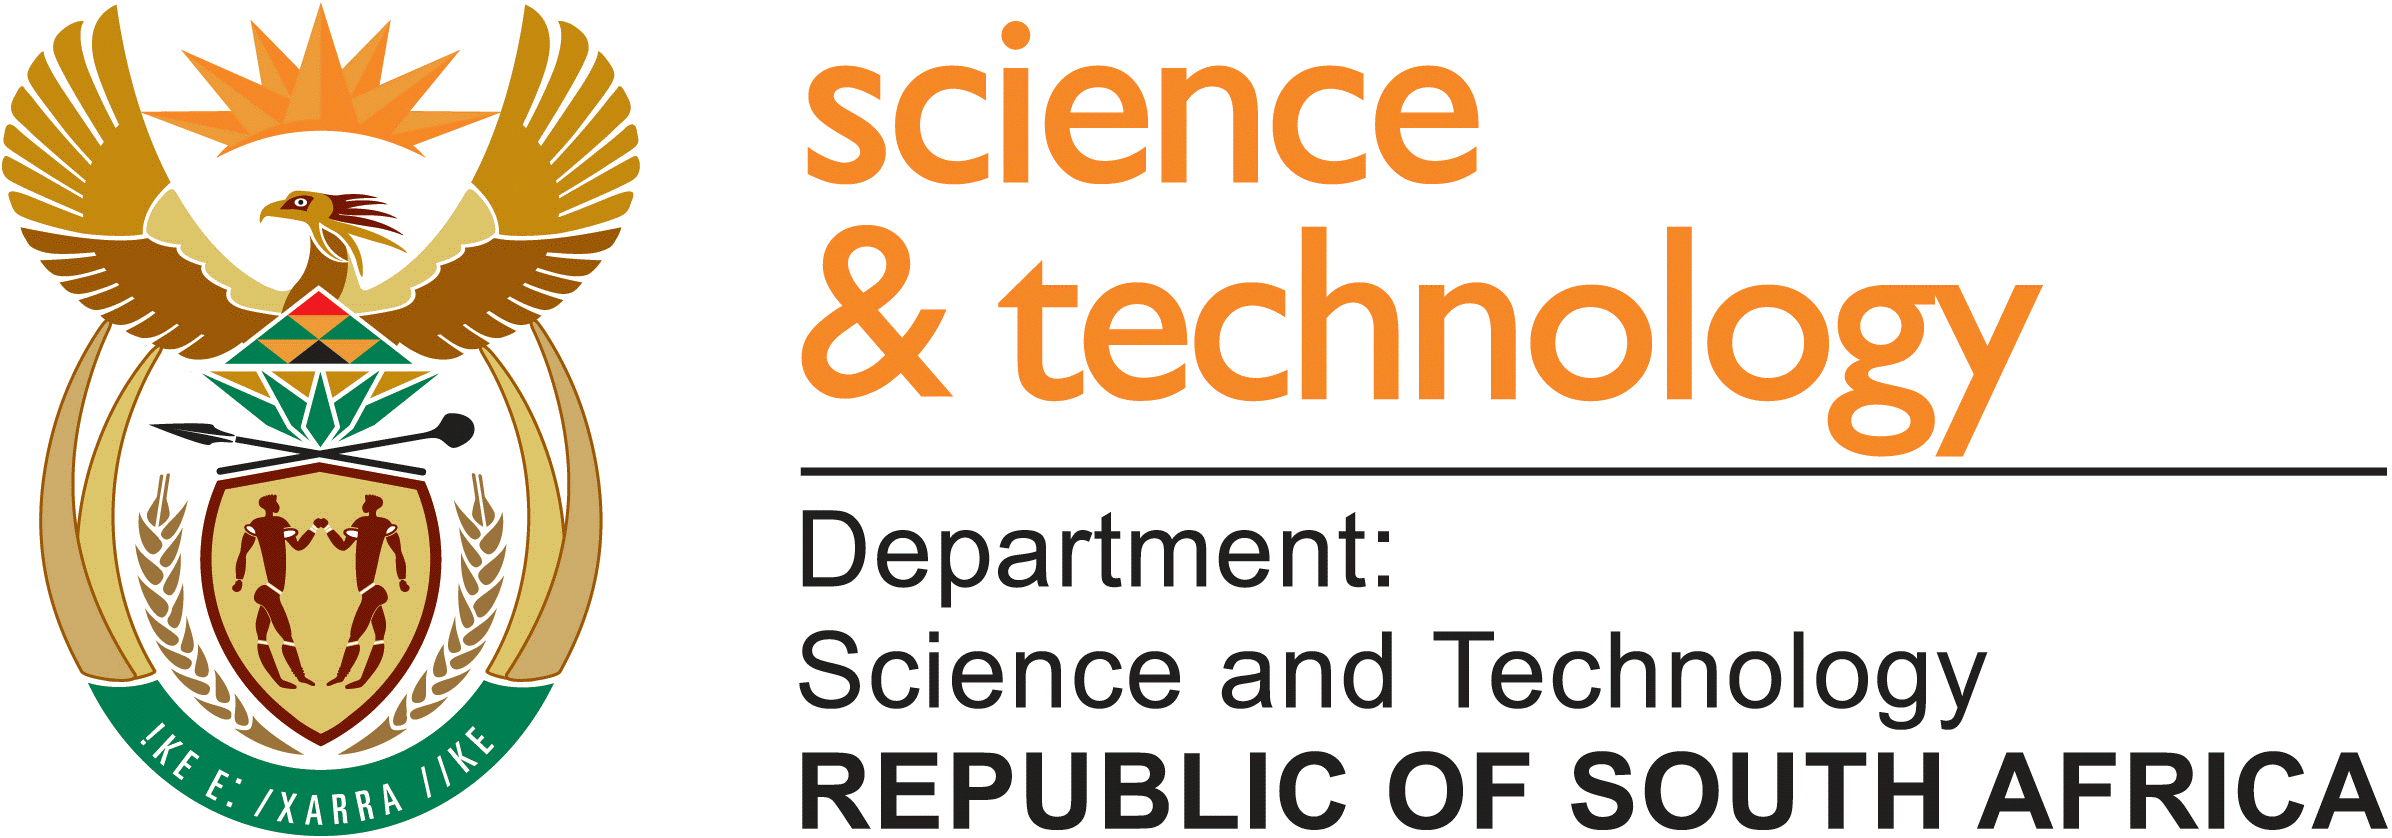 Science and Technology 